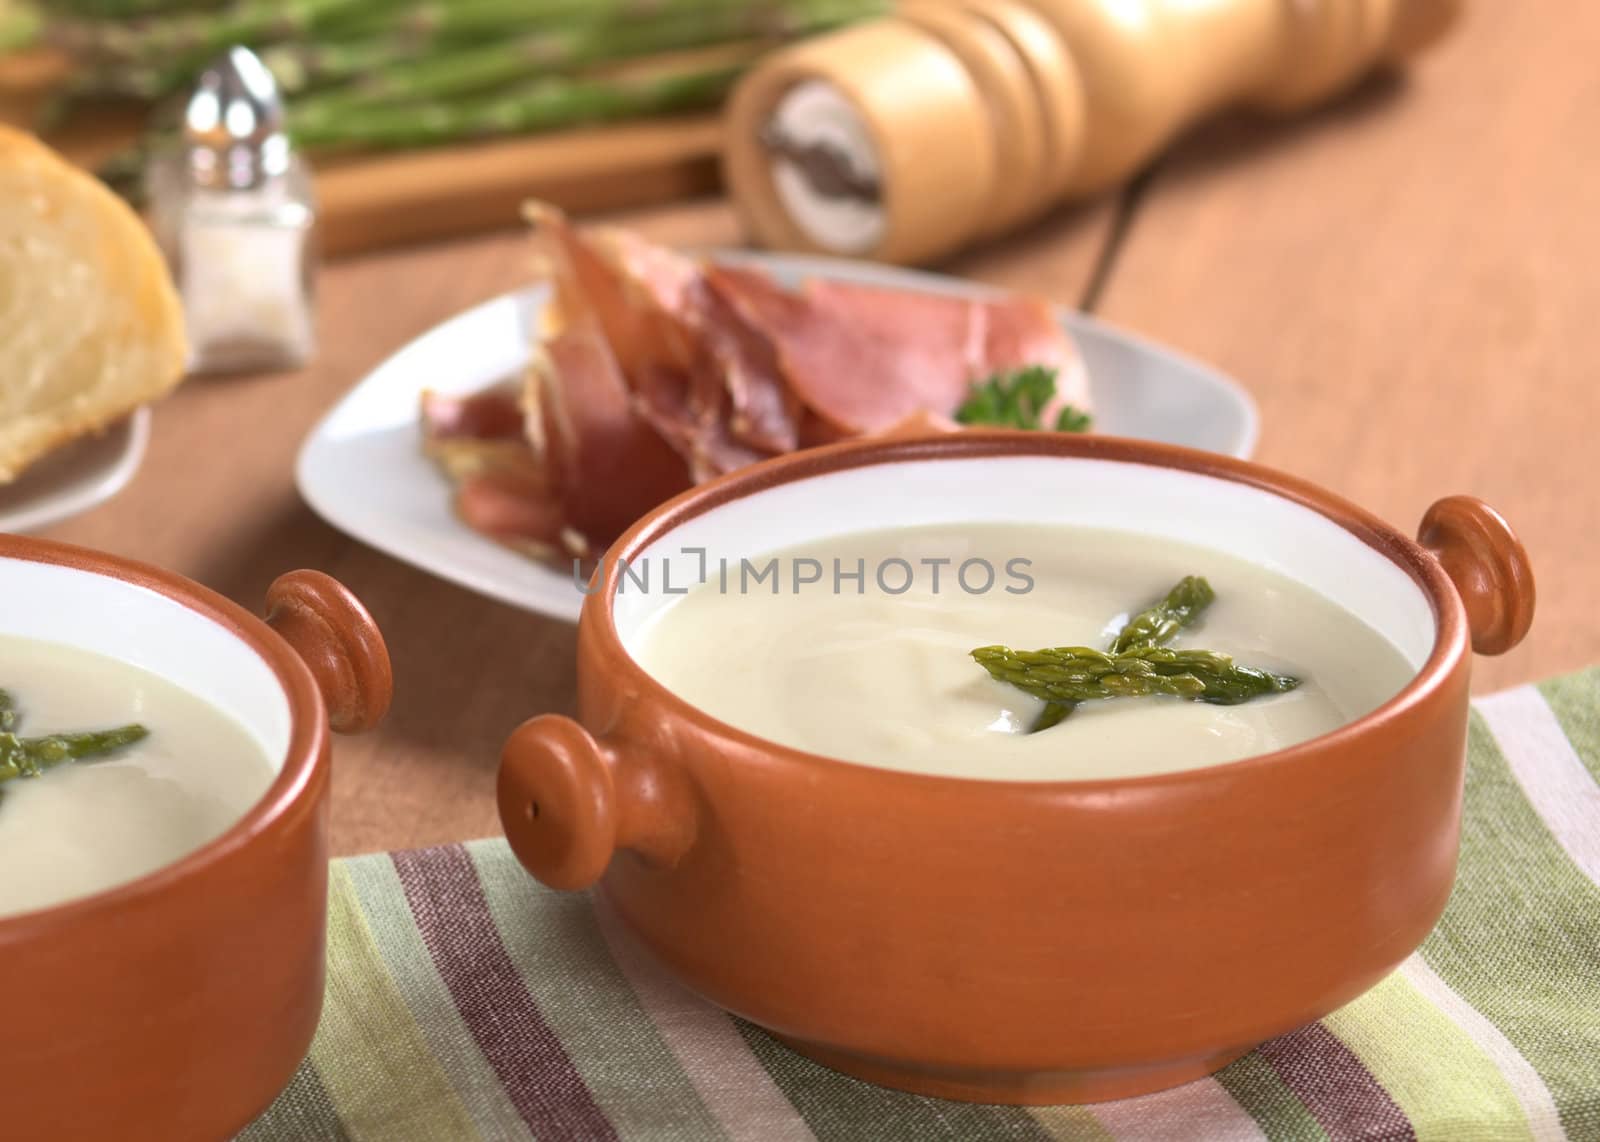 Cream of asparagus with green asparagus heads in rustic bowl with slices of ham, salt and pepper in the back on wood (Selective Focus, Focus on the asparagus head in the right bowl)